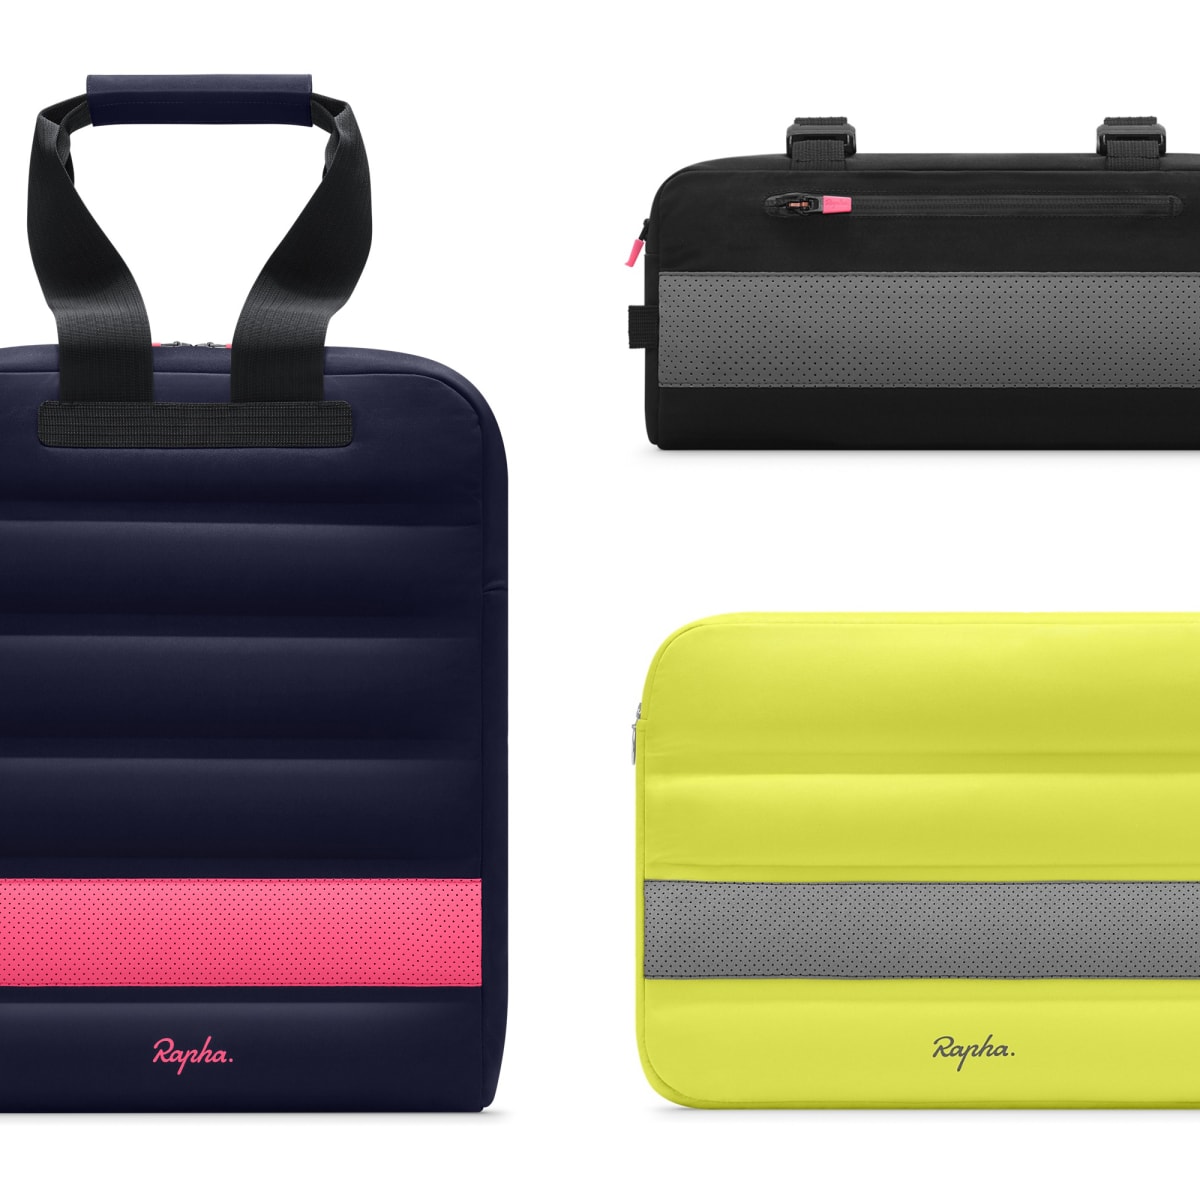 Rapha releases an exclusive line of accessories for Apple - Acquire